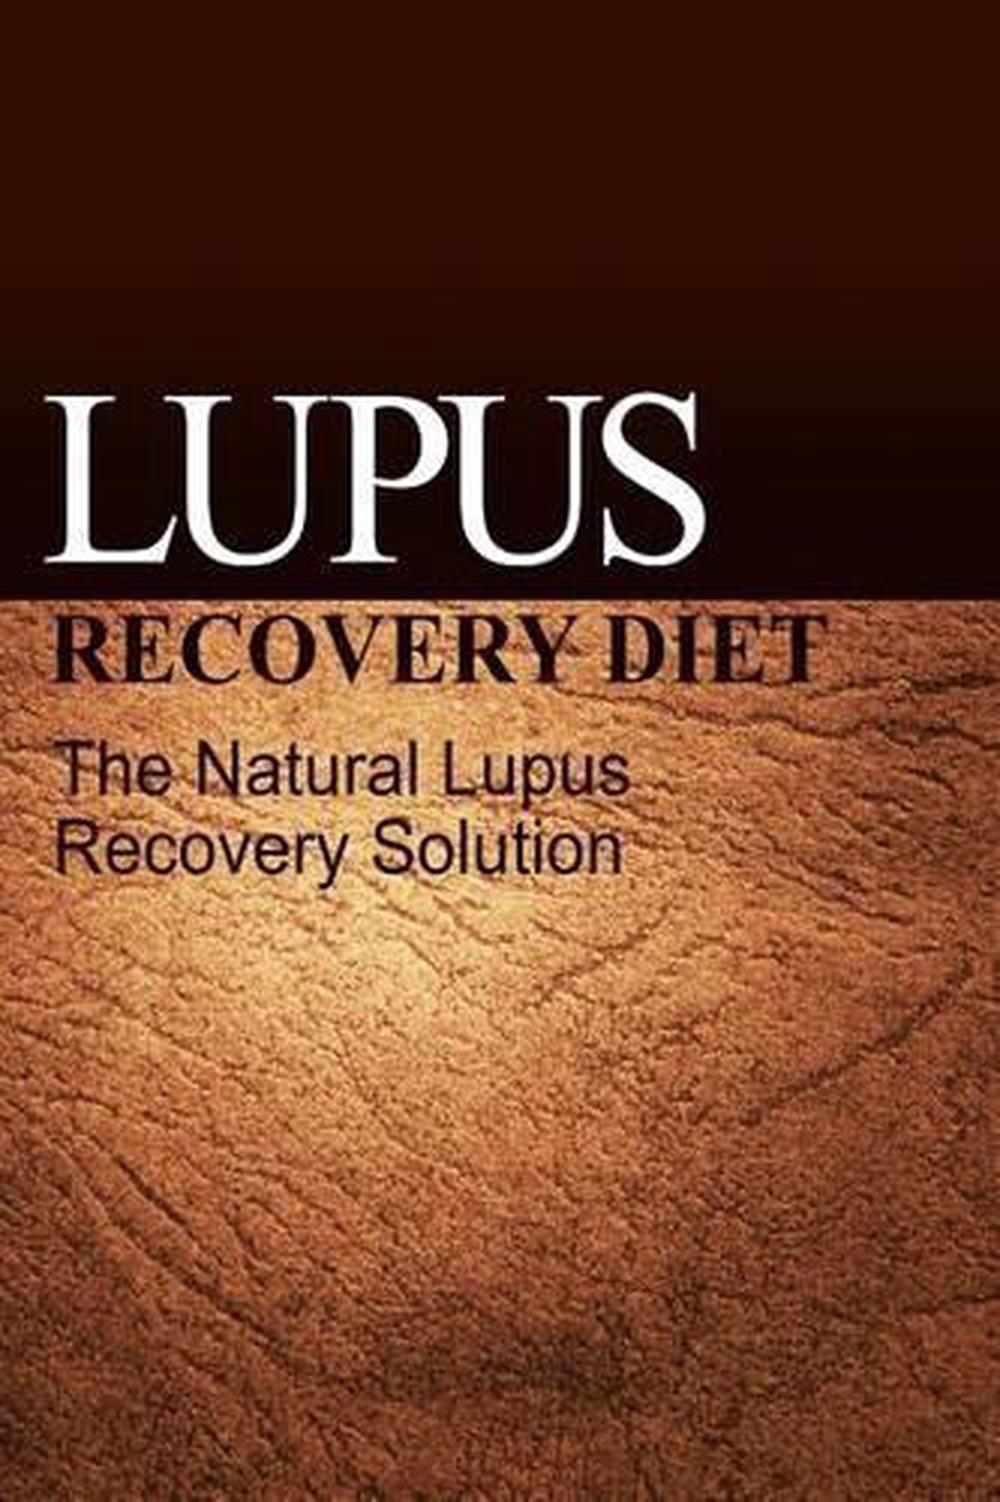 lupus-recovery-diet-the-natural-lupus-recovery-solution-by